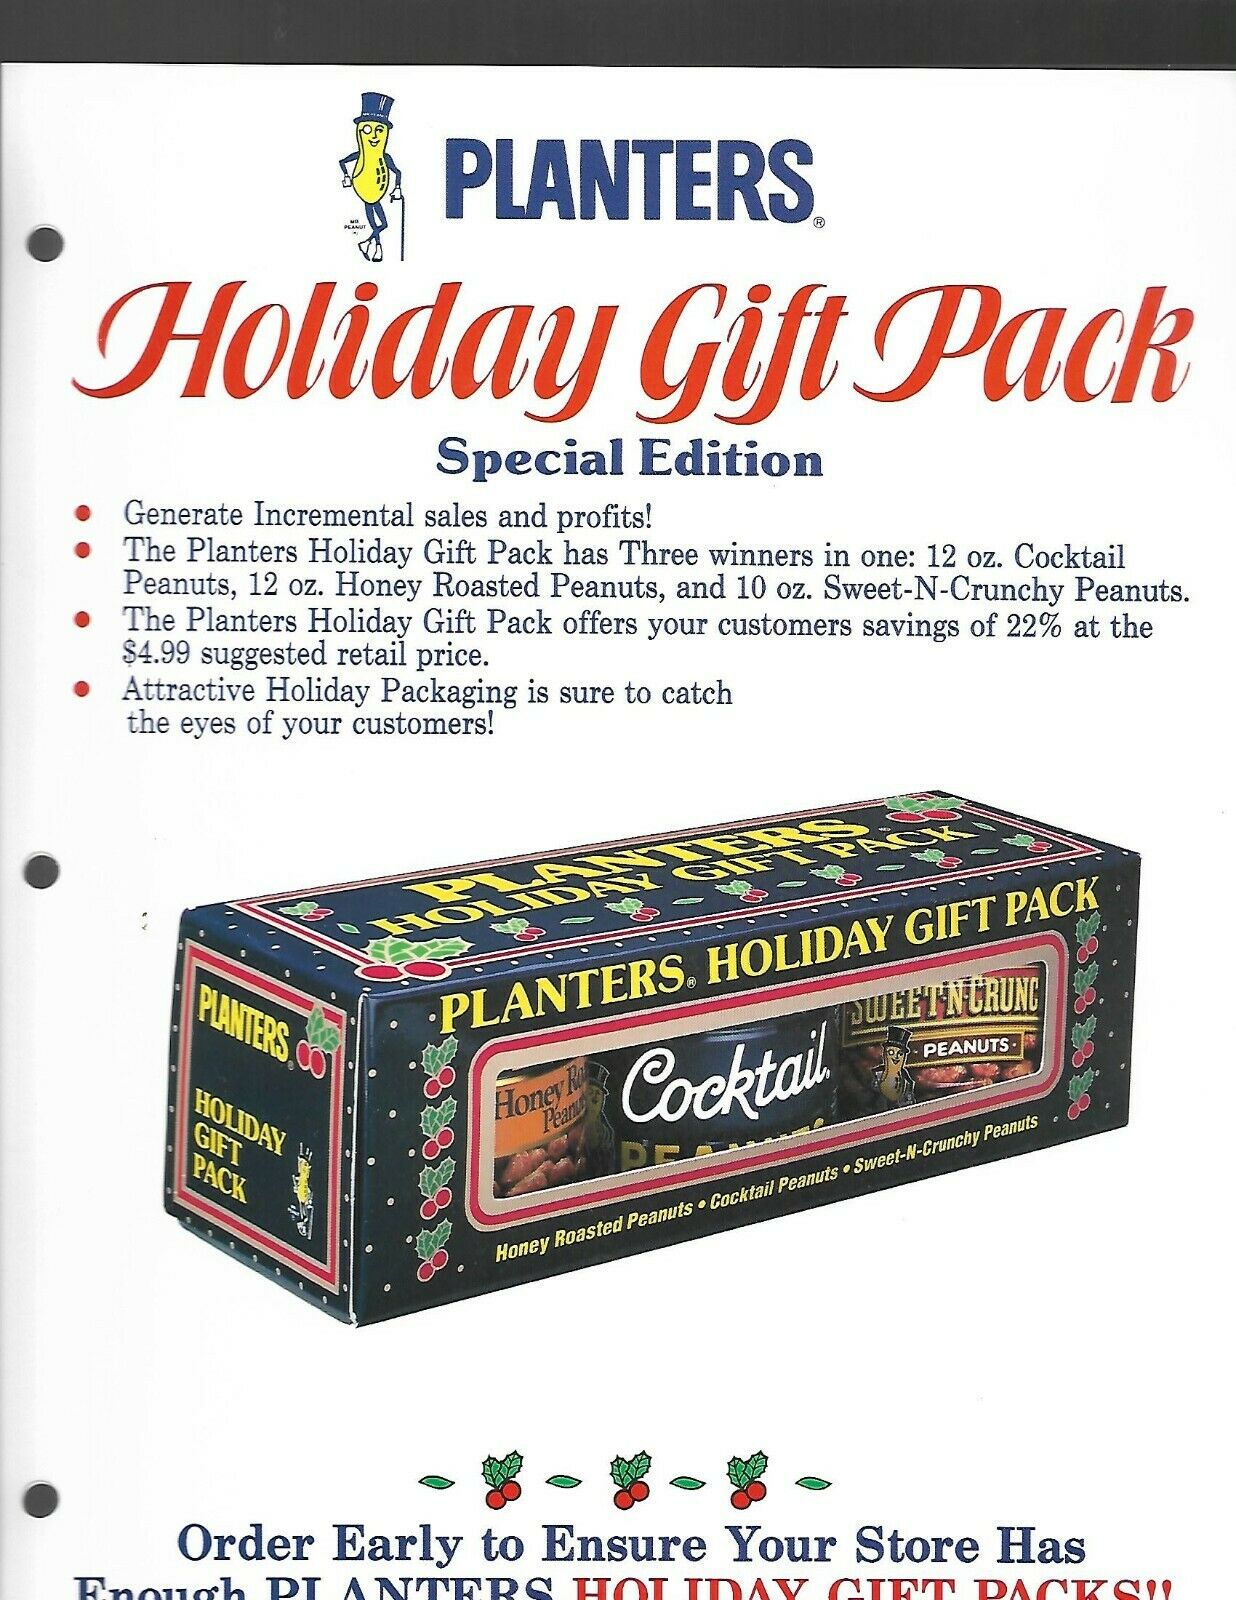 Planters Peanut Promotion Page Holiday Gift Pack Special Edition -2 Sided#23